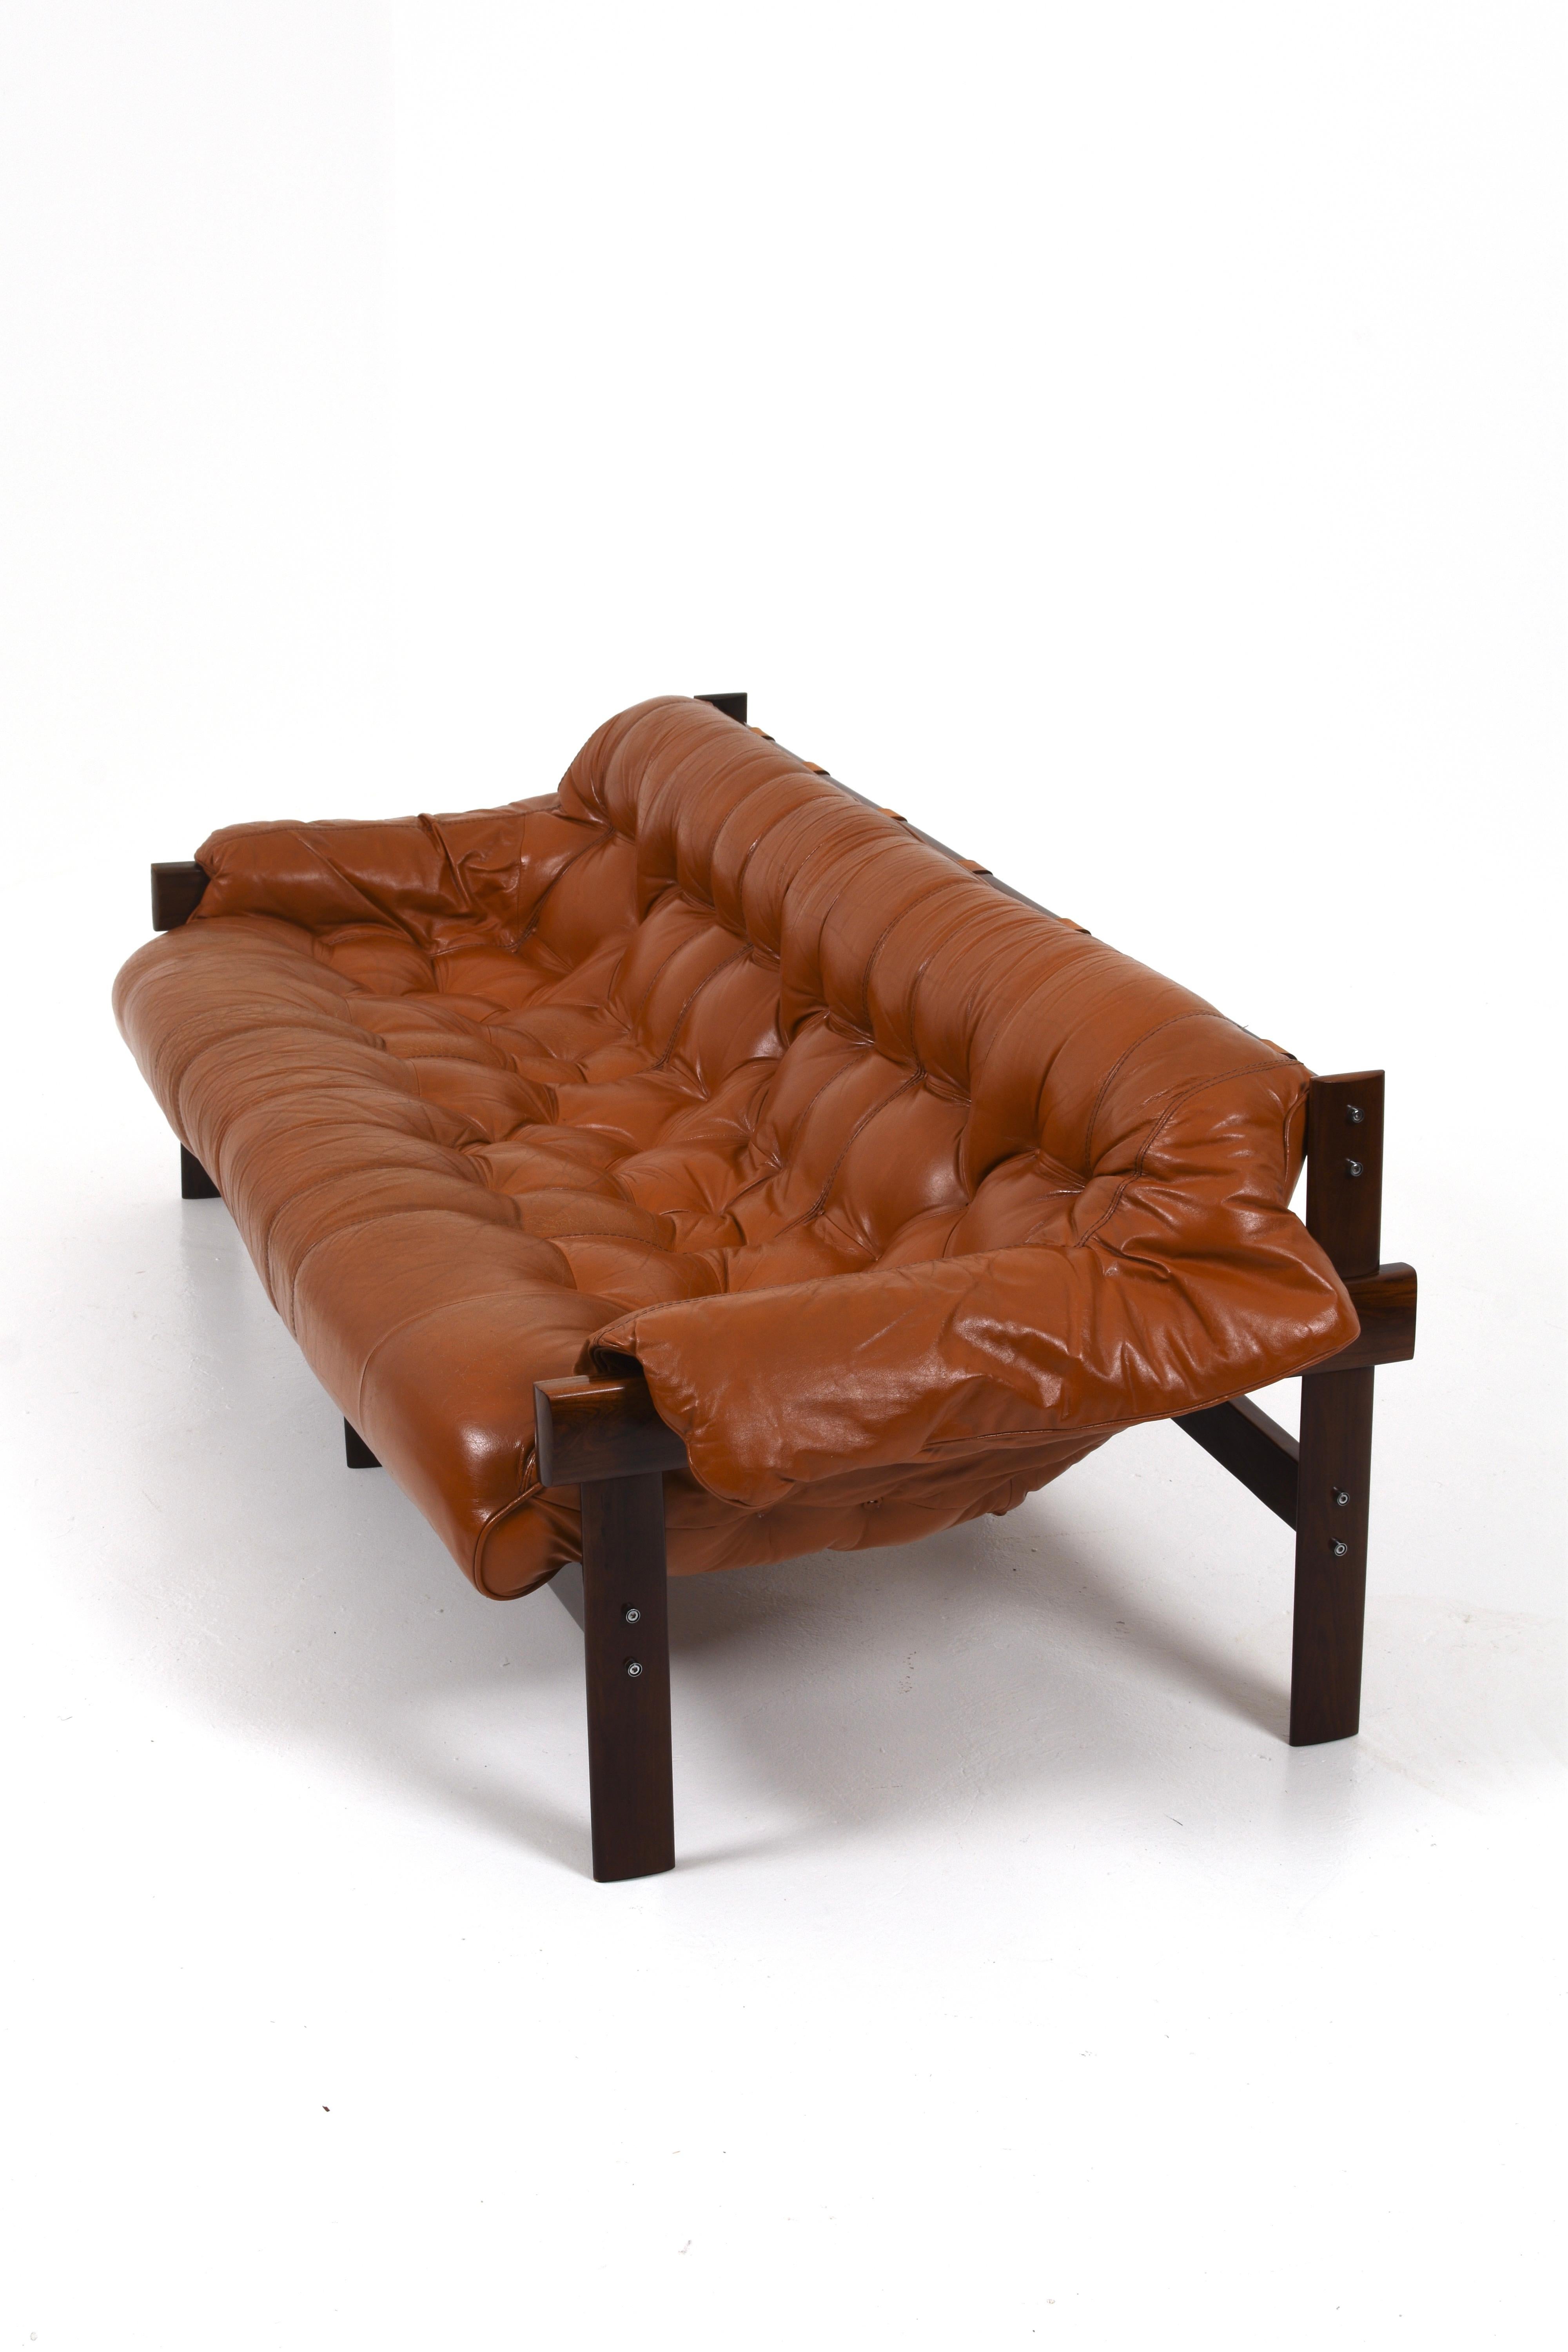 percival lafer mp-81 sofa in red leather